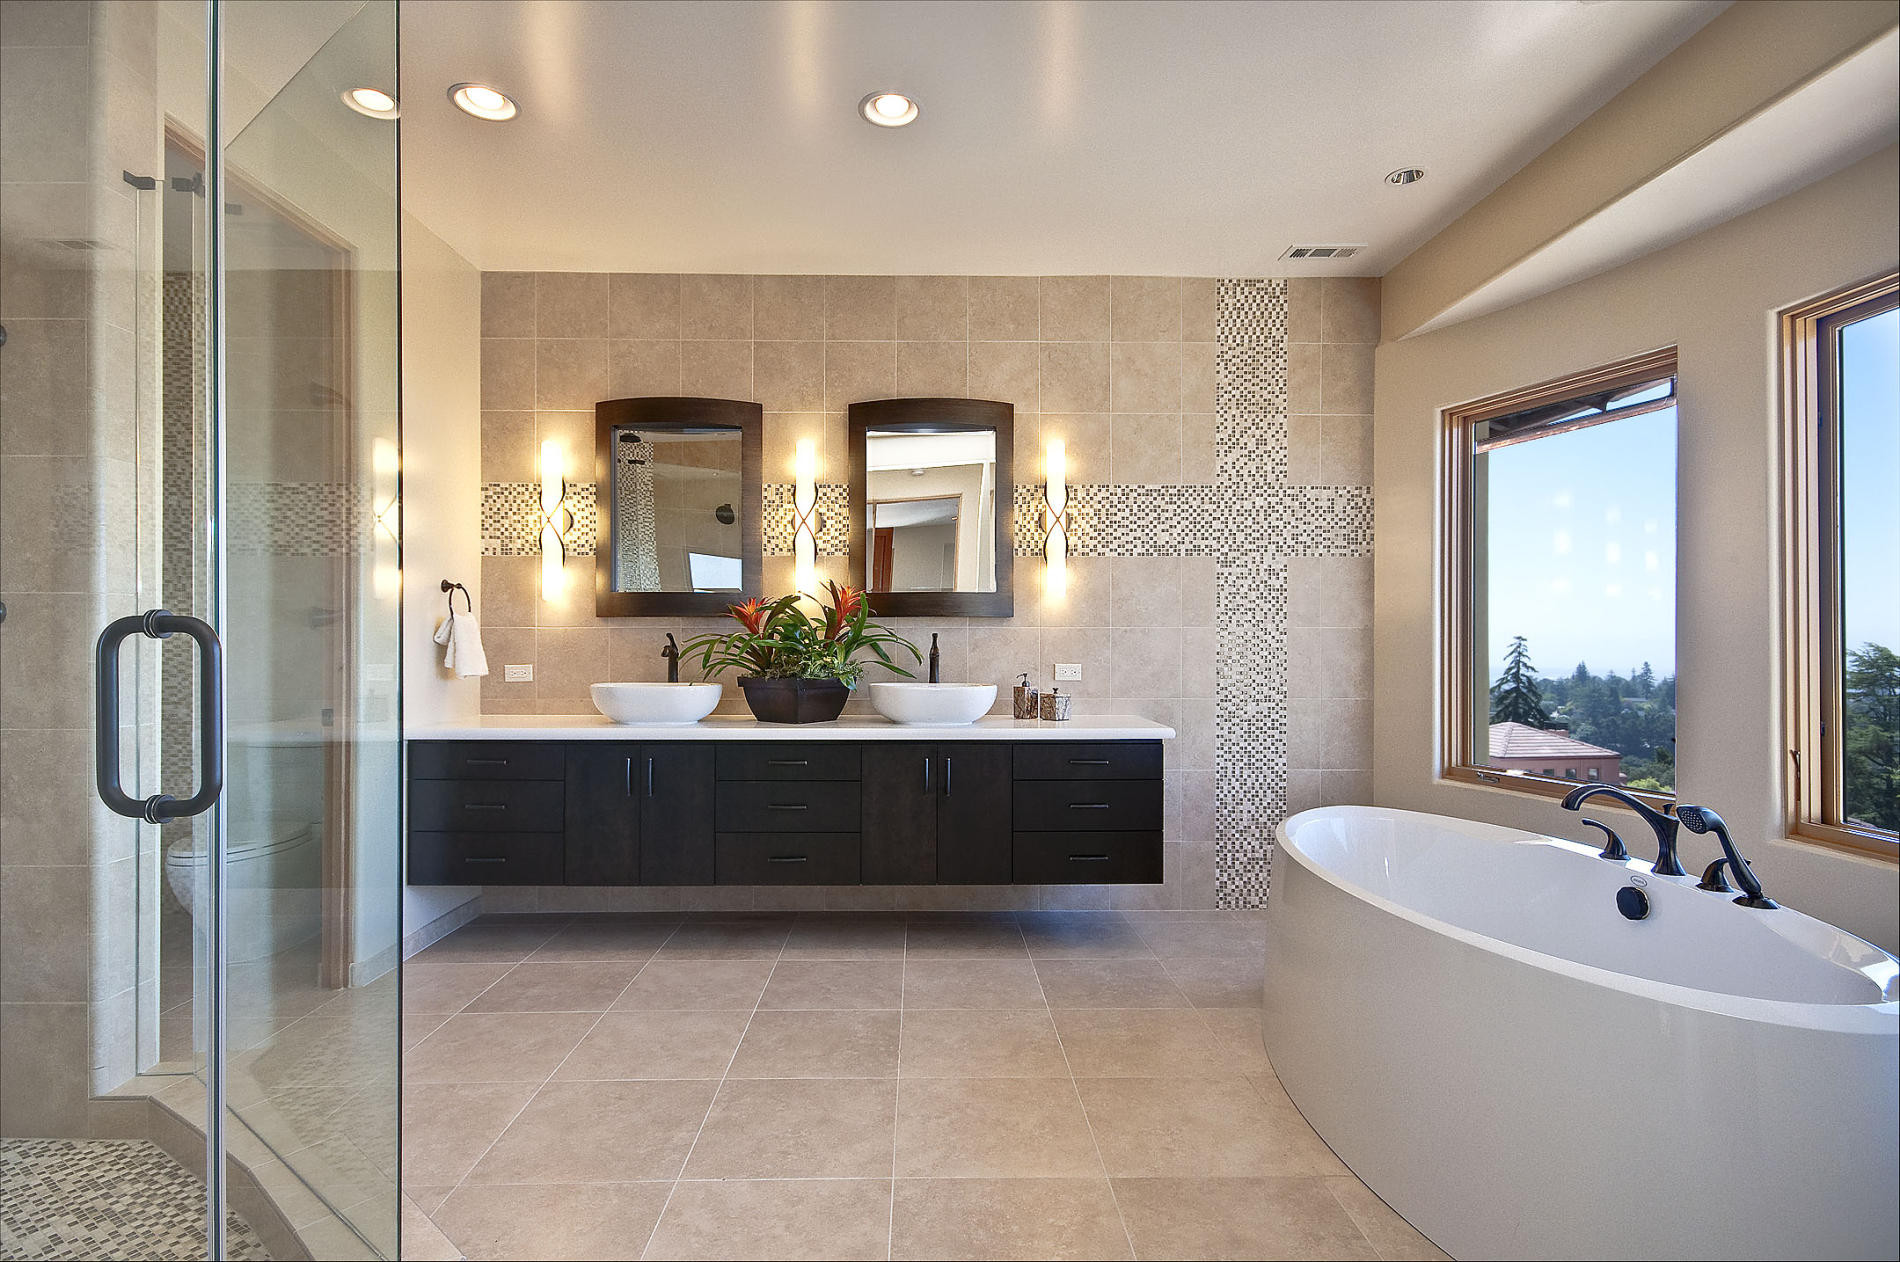 Master Bathroom Layout Ideas
 Why You Should Planning Master Bathroom Layouts MidCityEast